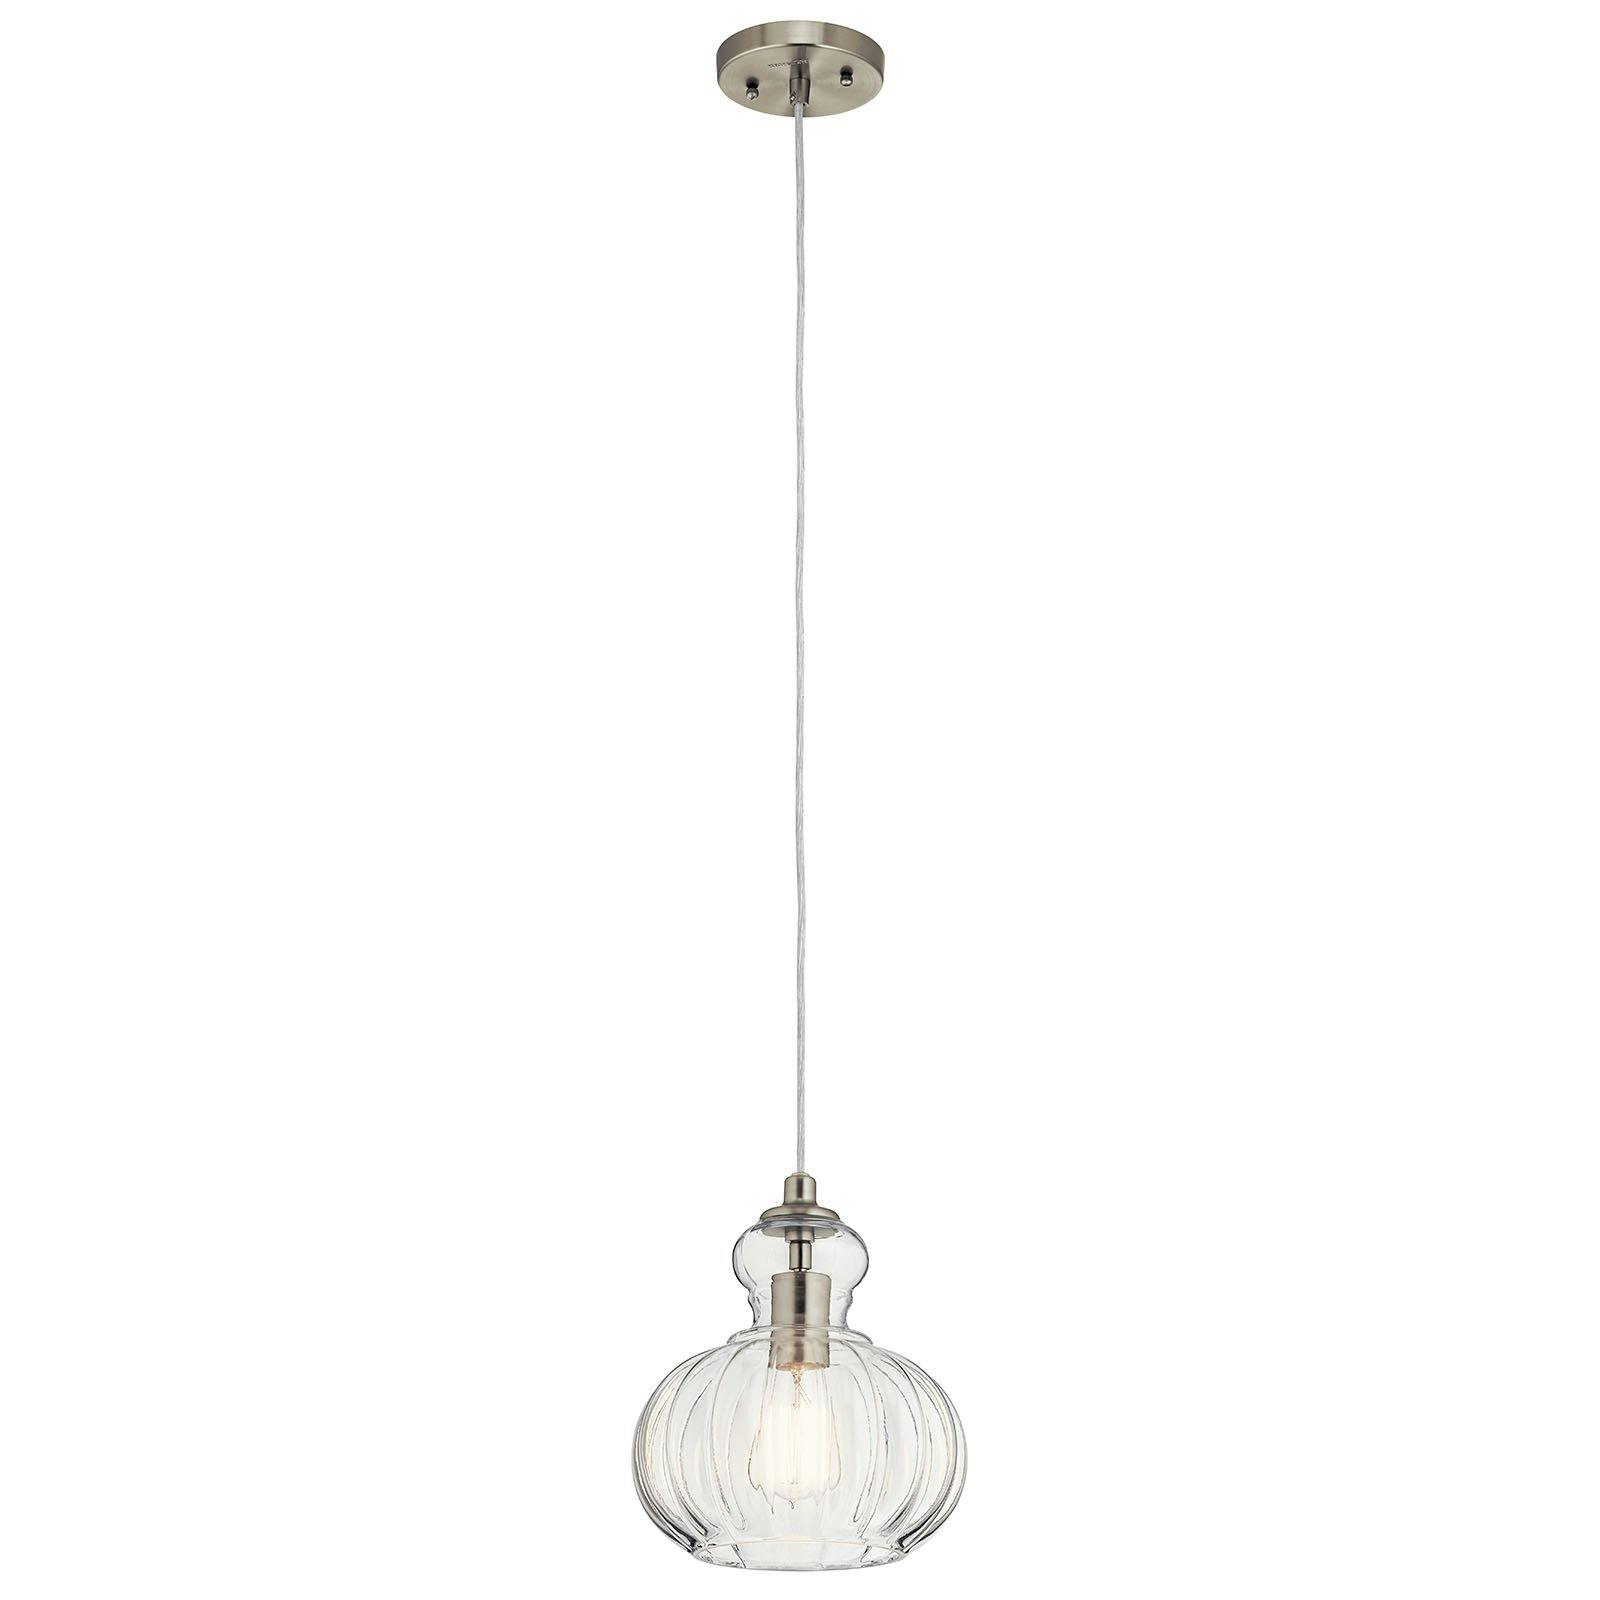 Riviera 10.25" 1 Light Pendant in Nickel on a white background